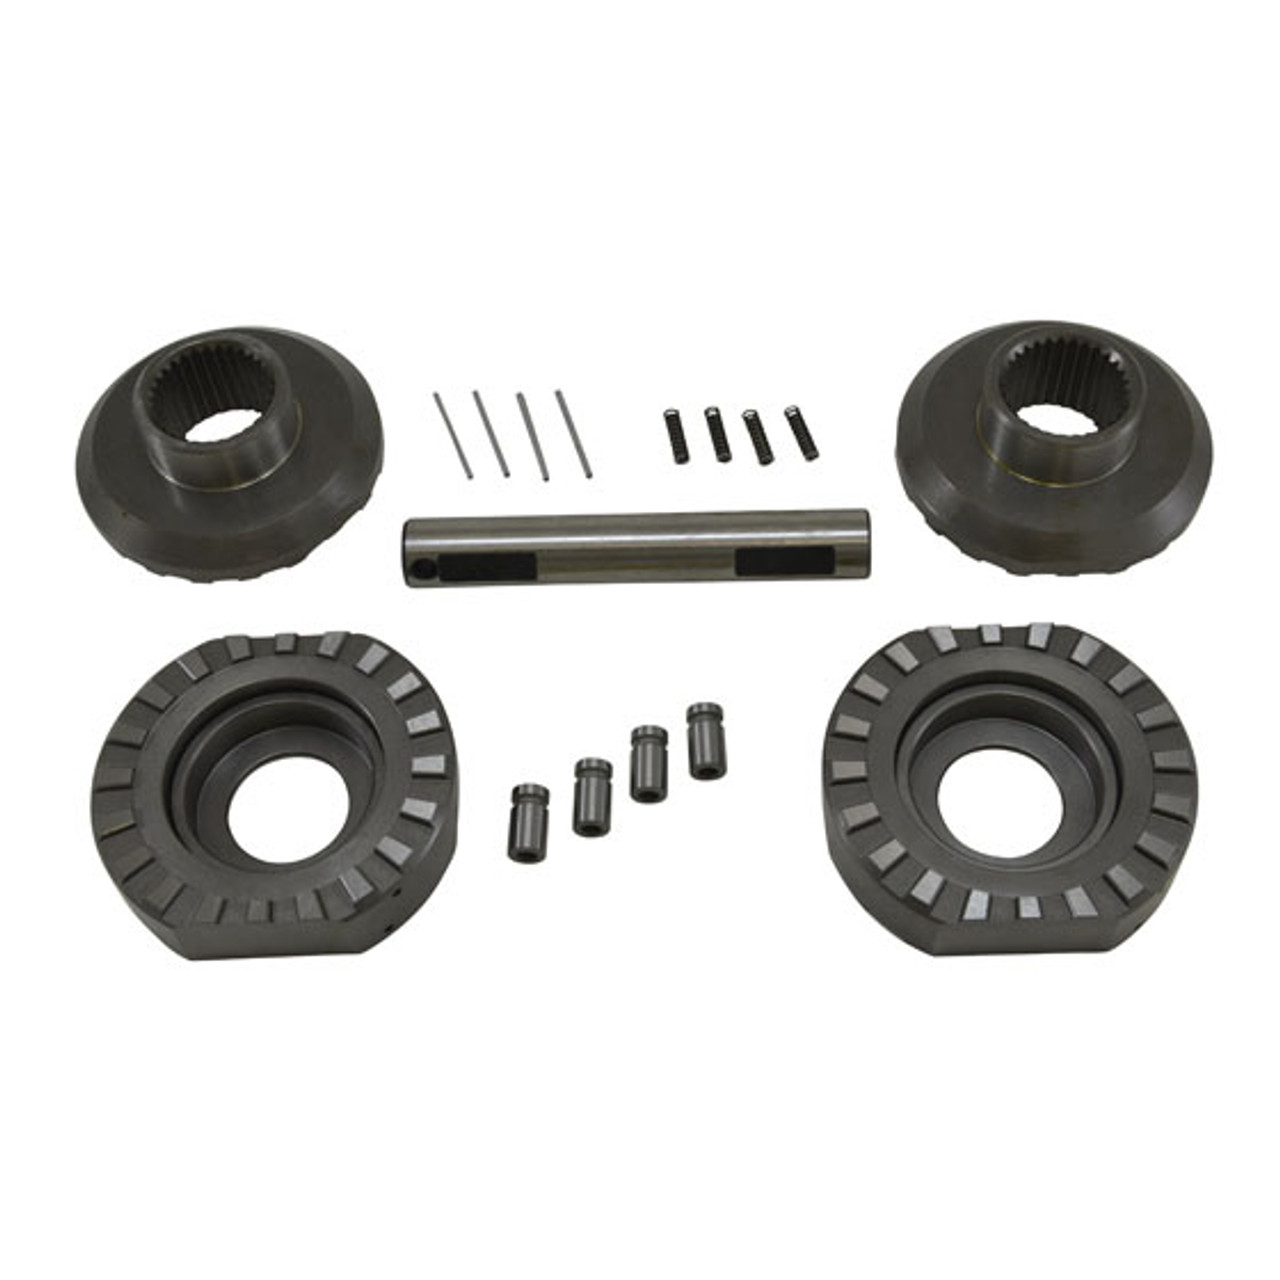 Spartan Locker for Toyota 8" differential with 30 spline axles, includes heavy-duty cross pin shaft